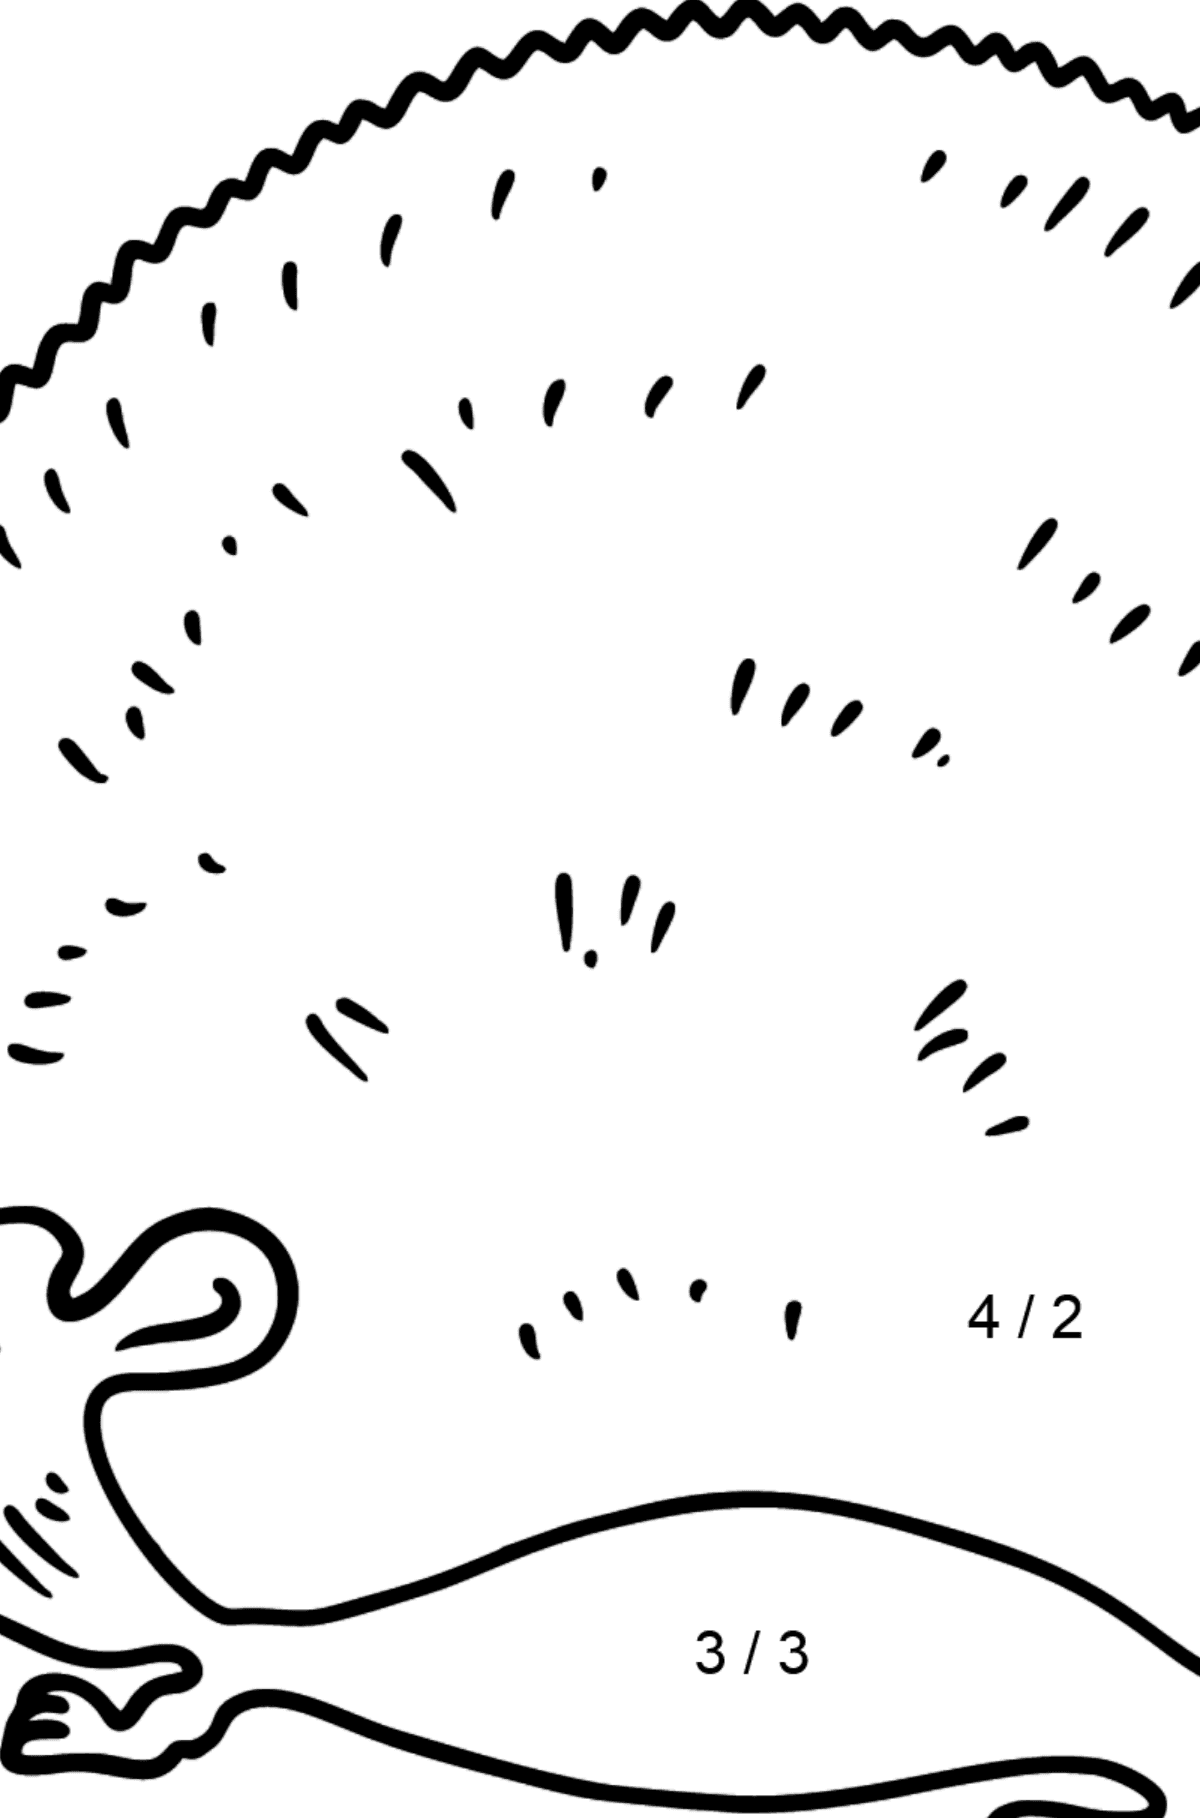 Hedgehog coloring page - Math Coloring - Division for Kids